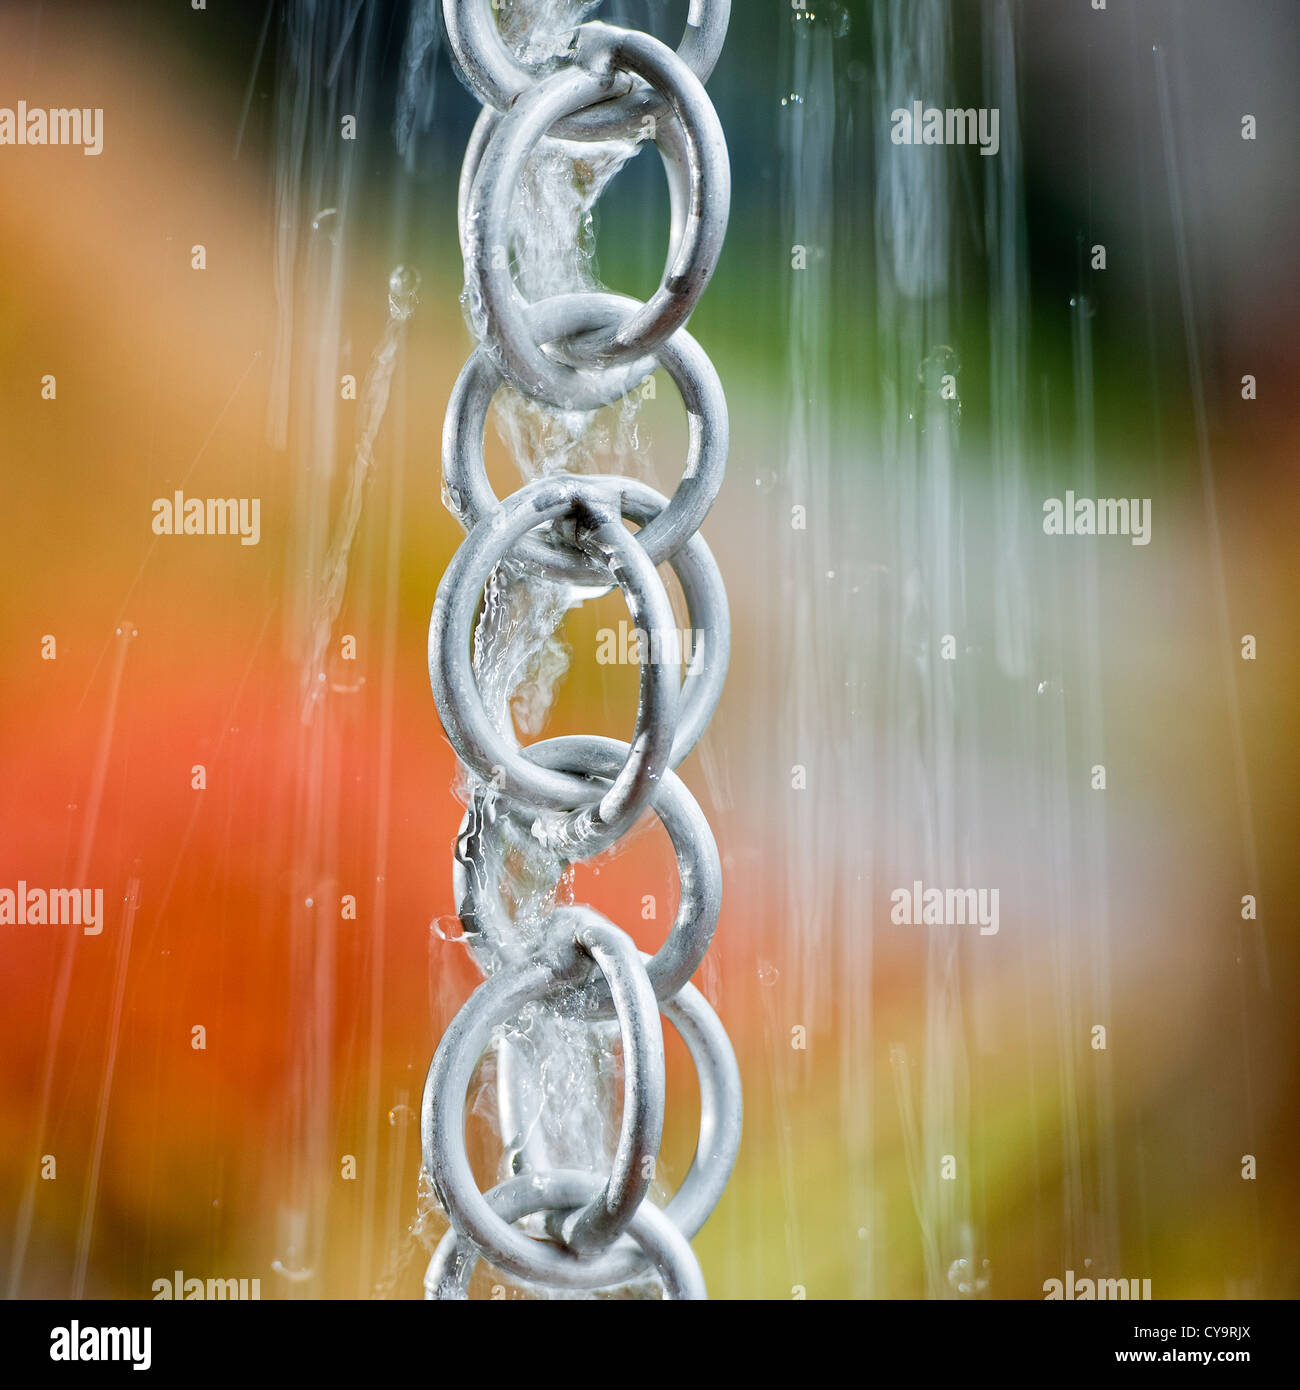 Rainwater from a household roof gushes down a rain chain during a storm.  Square format. Stock Photo